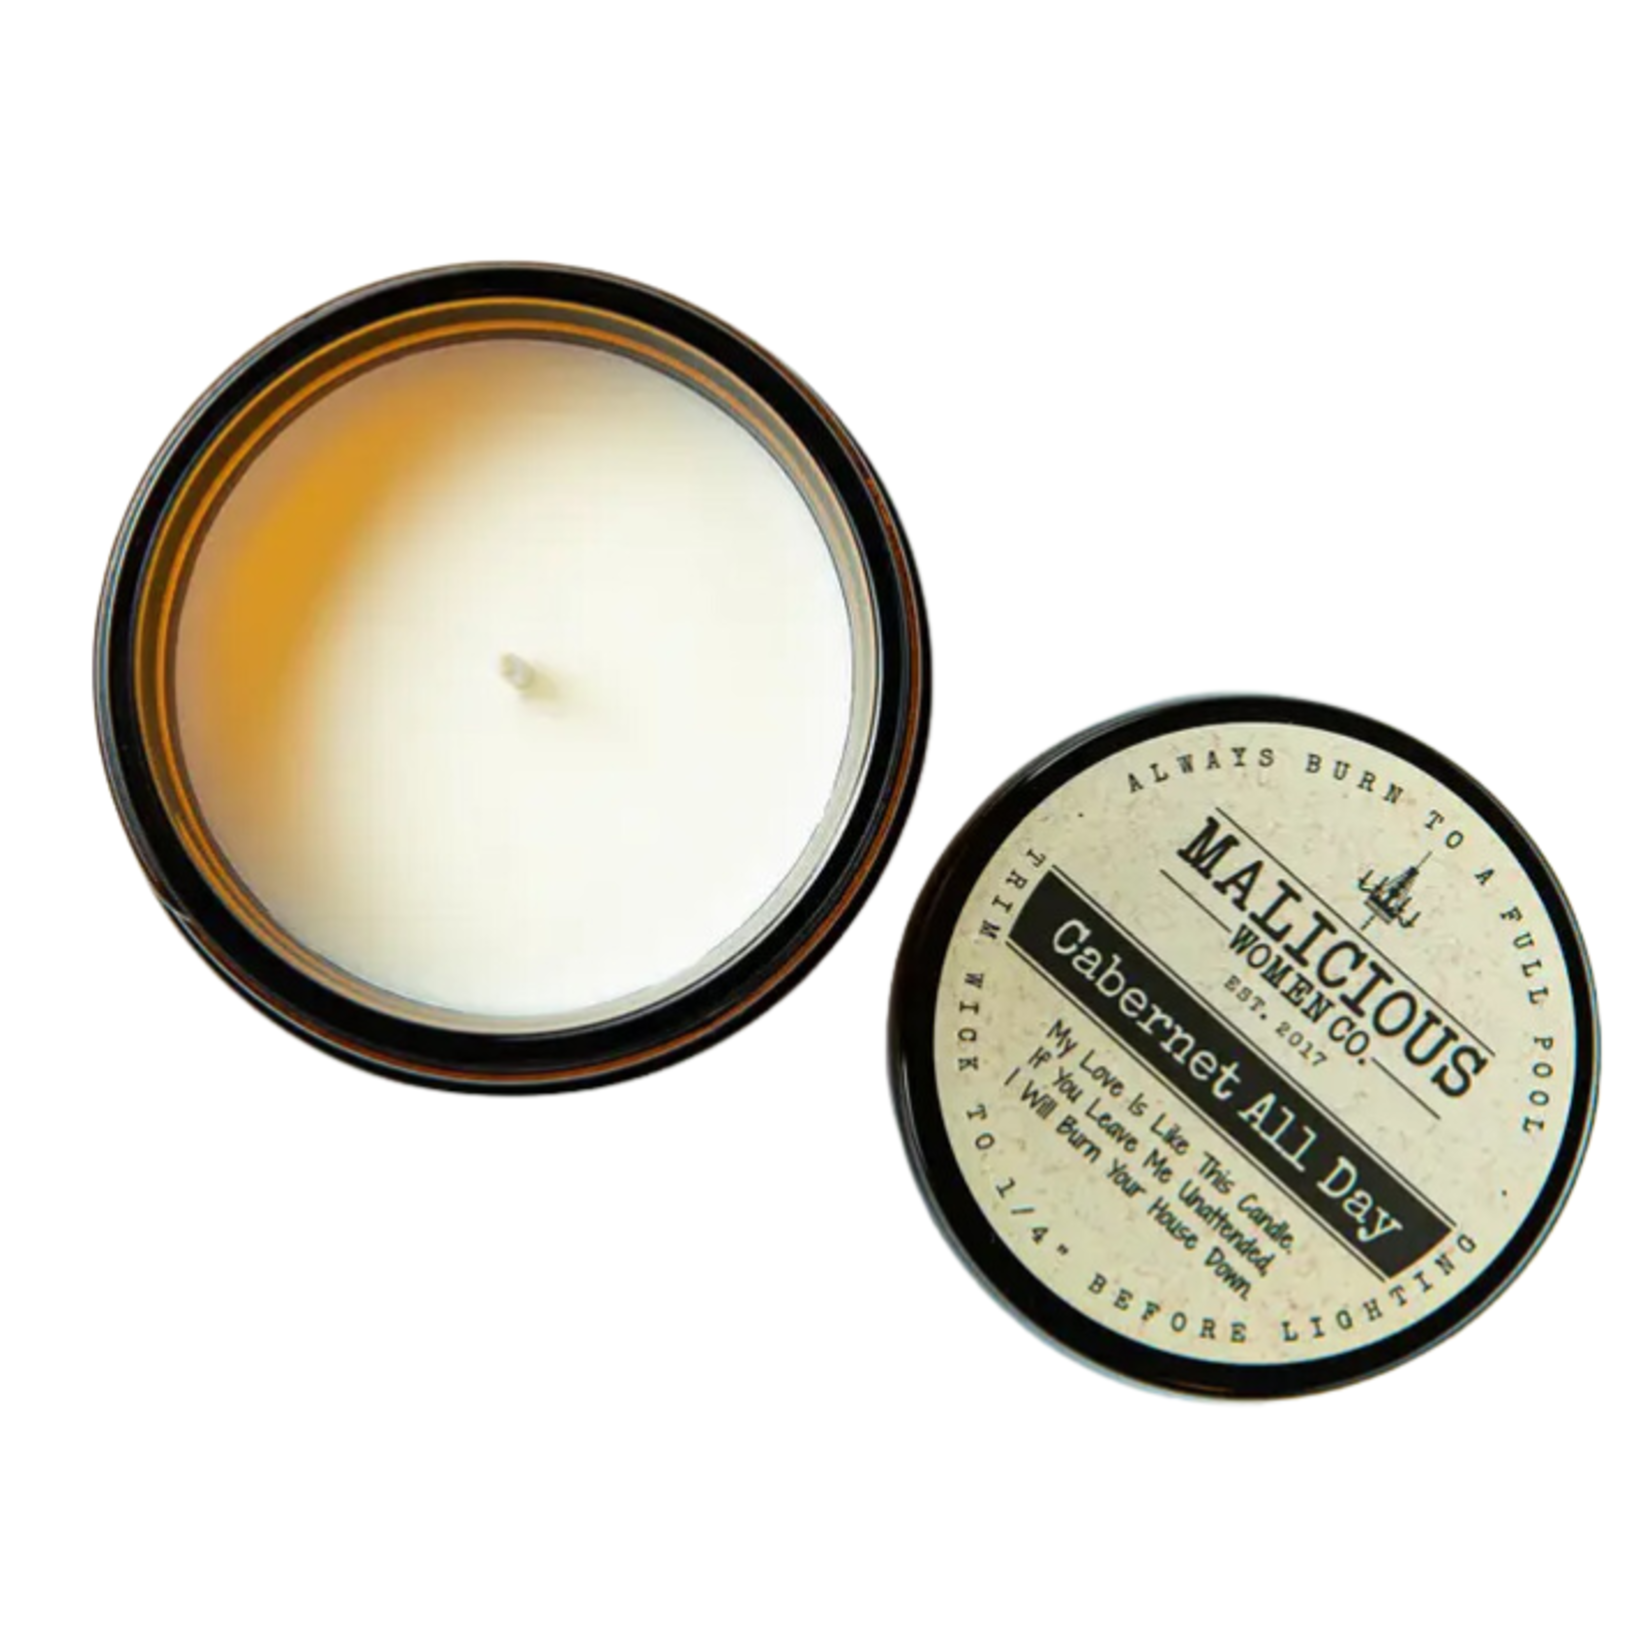 Malicious Woman Candle Co. Brains, Beauty, & Badassery Candle